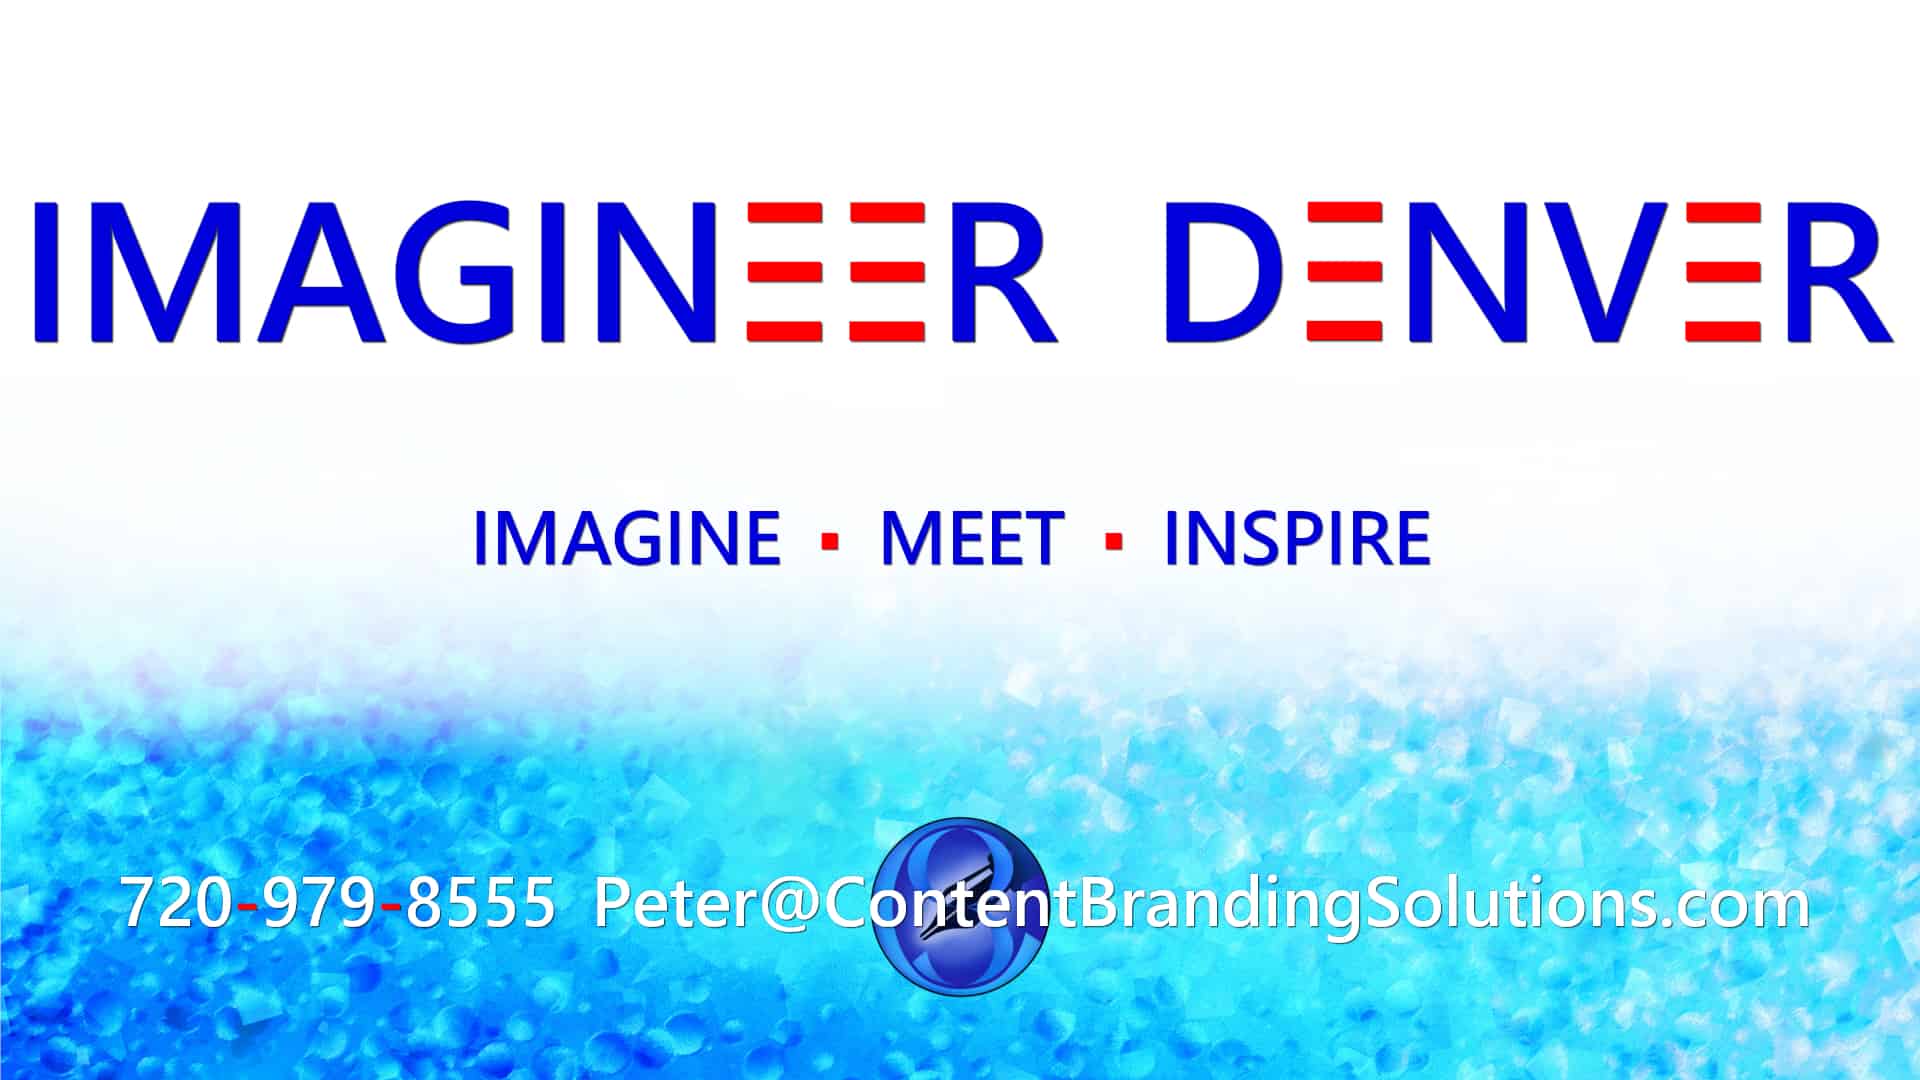 Announcing a FUN Denver Metro Networking Experience.  IMAGINEER Denver and Meet other Creative Entrepreneurs from diverse backgrounds to discuss everything from Start-ups to Small Business, Ideas, Tactics, and Strategies to boost success.